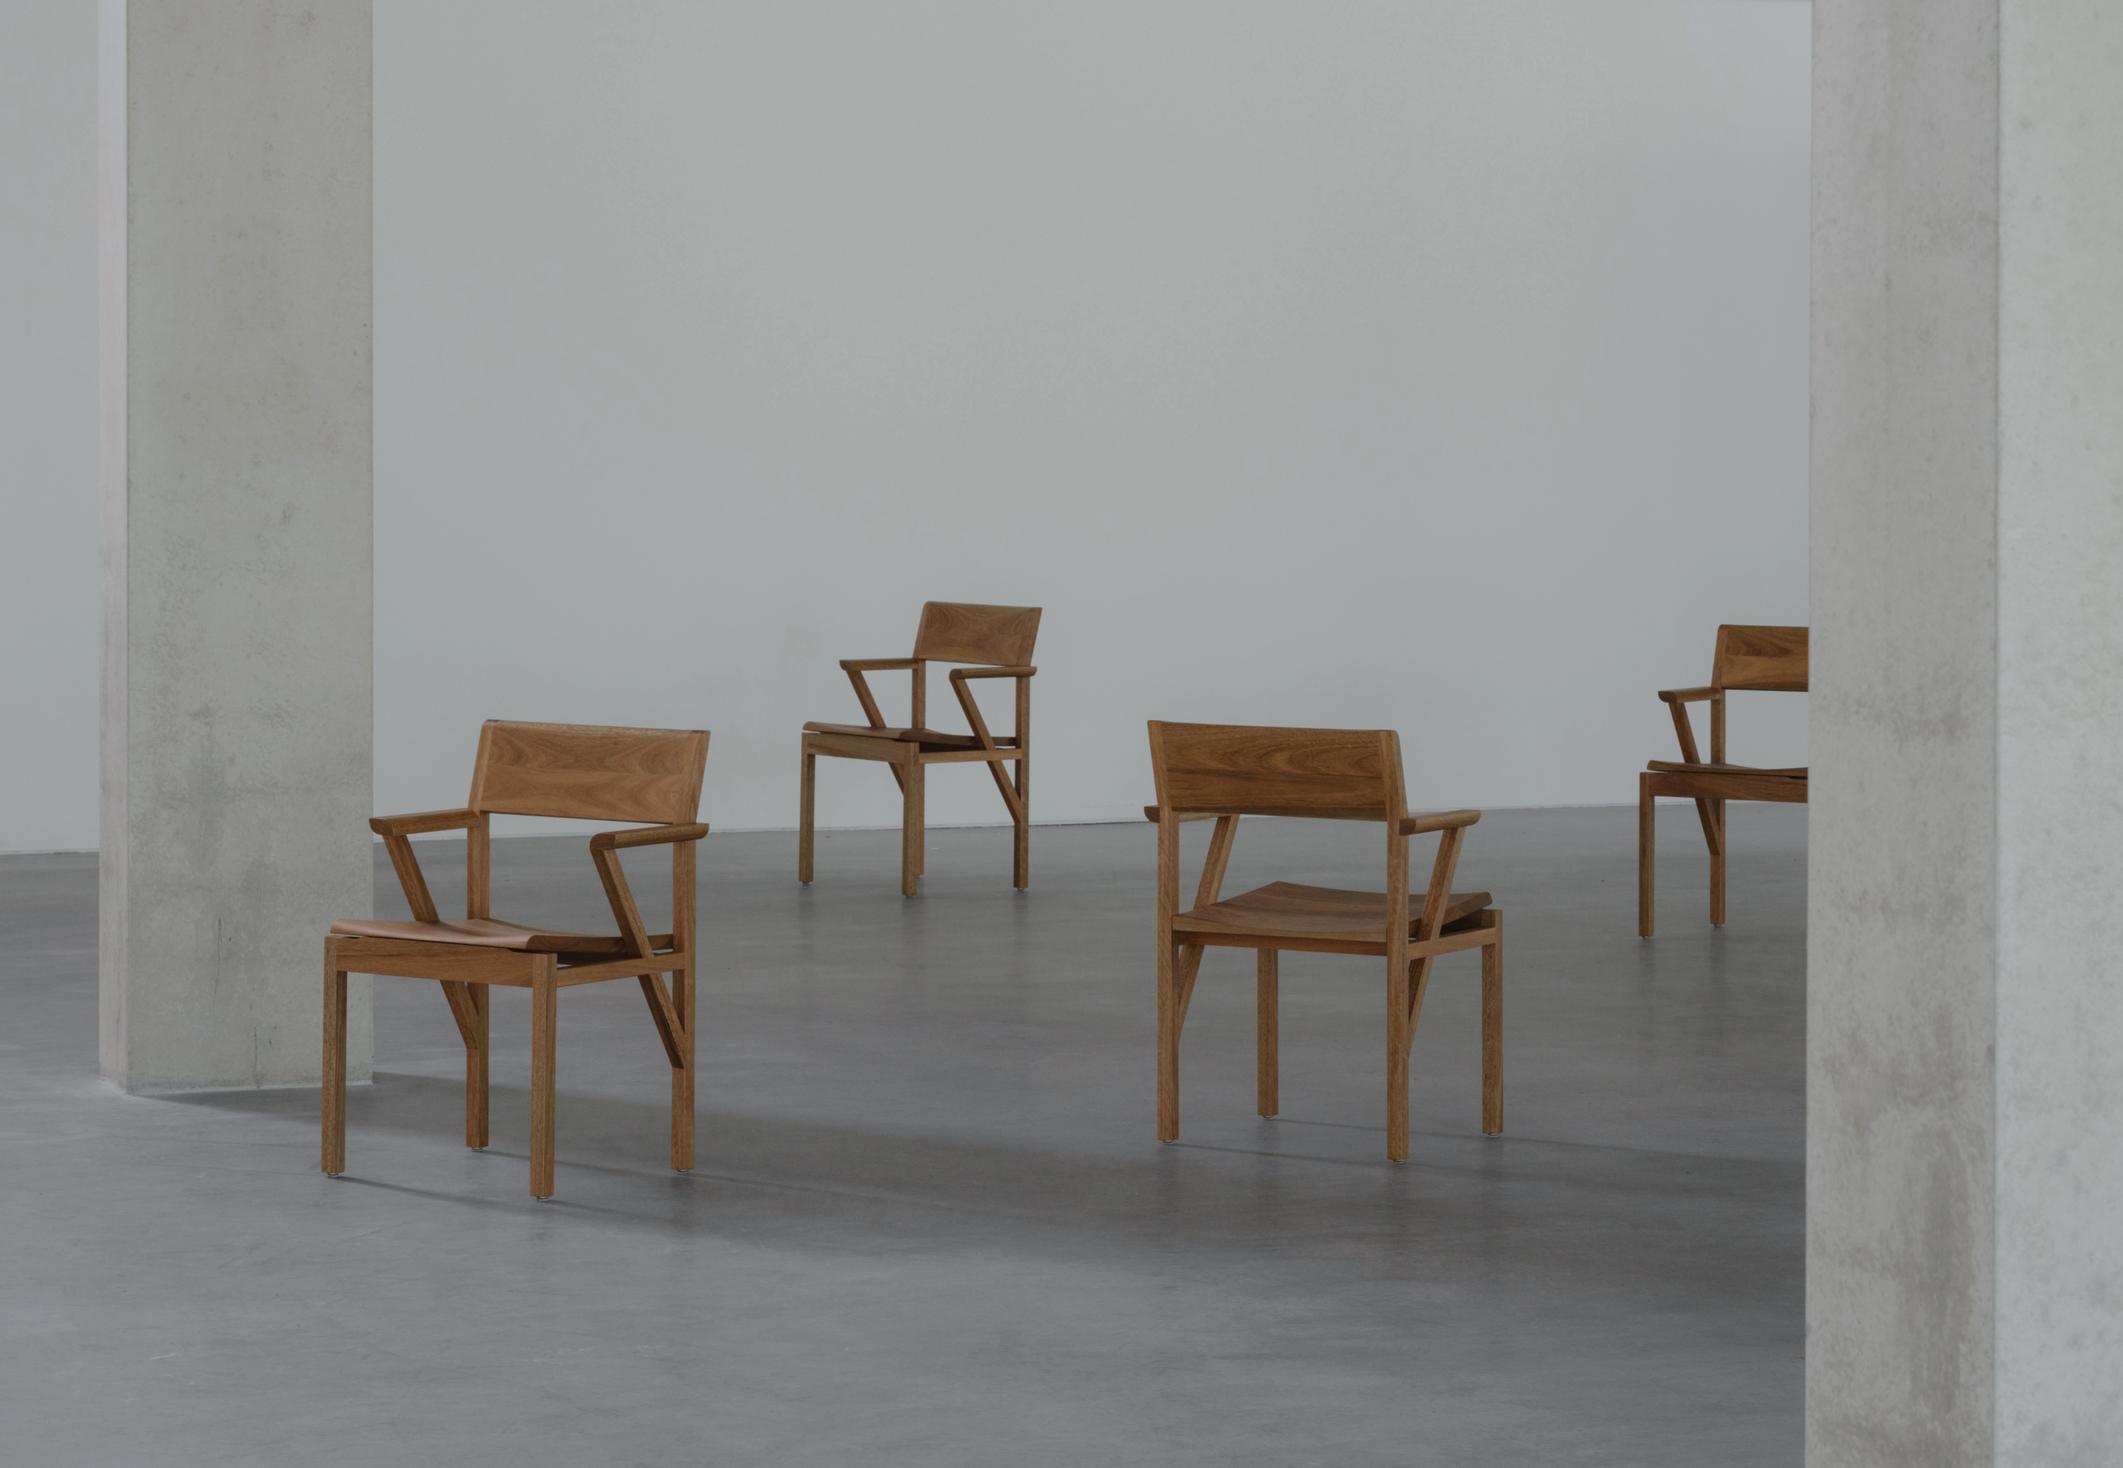 Chairs sitting in a format within a big open room.